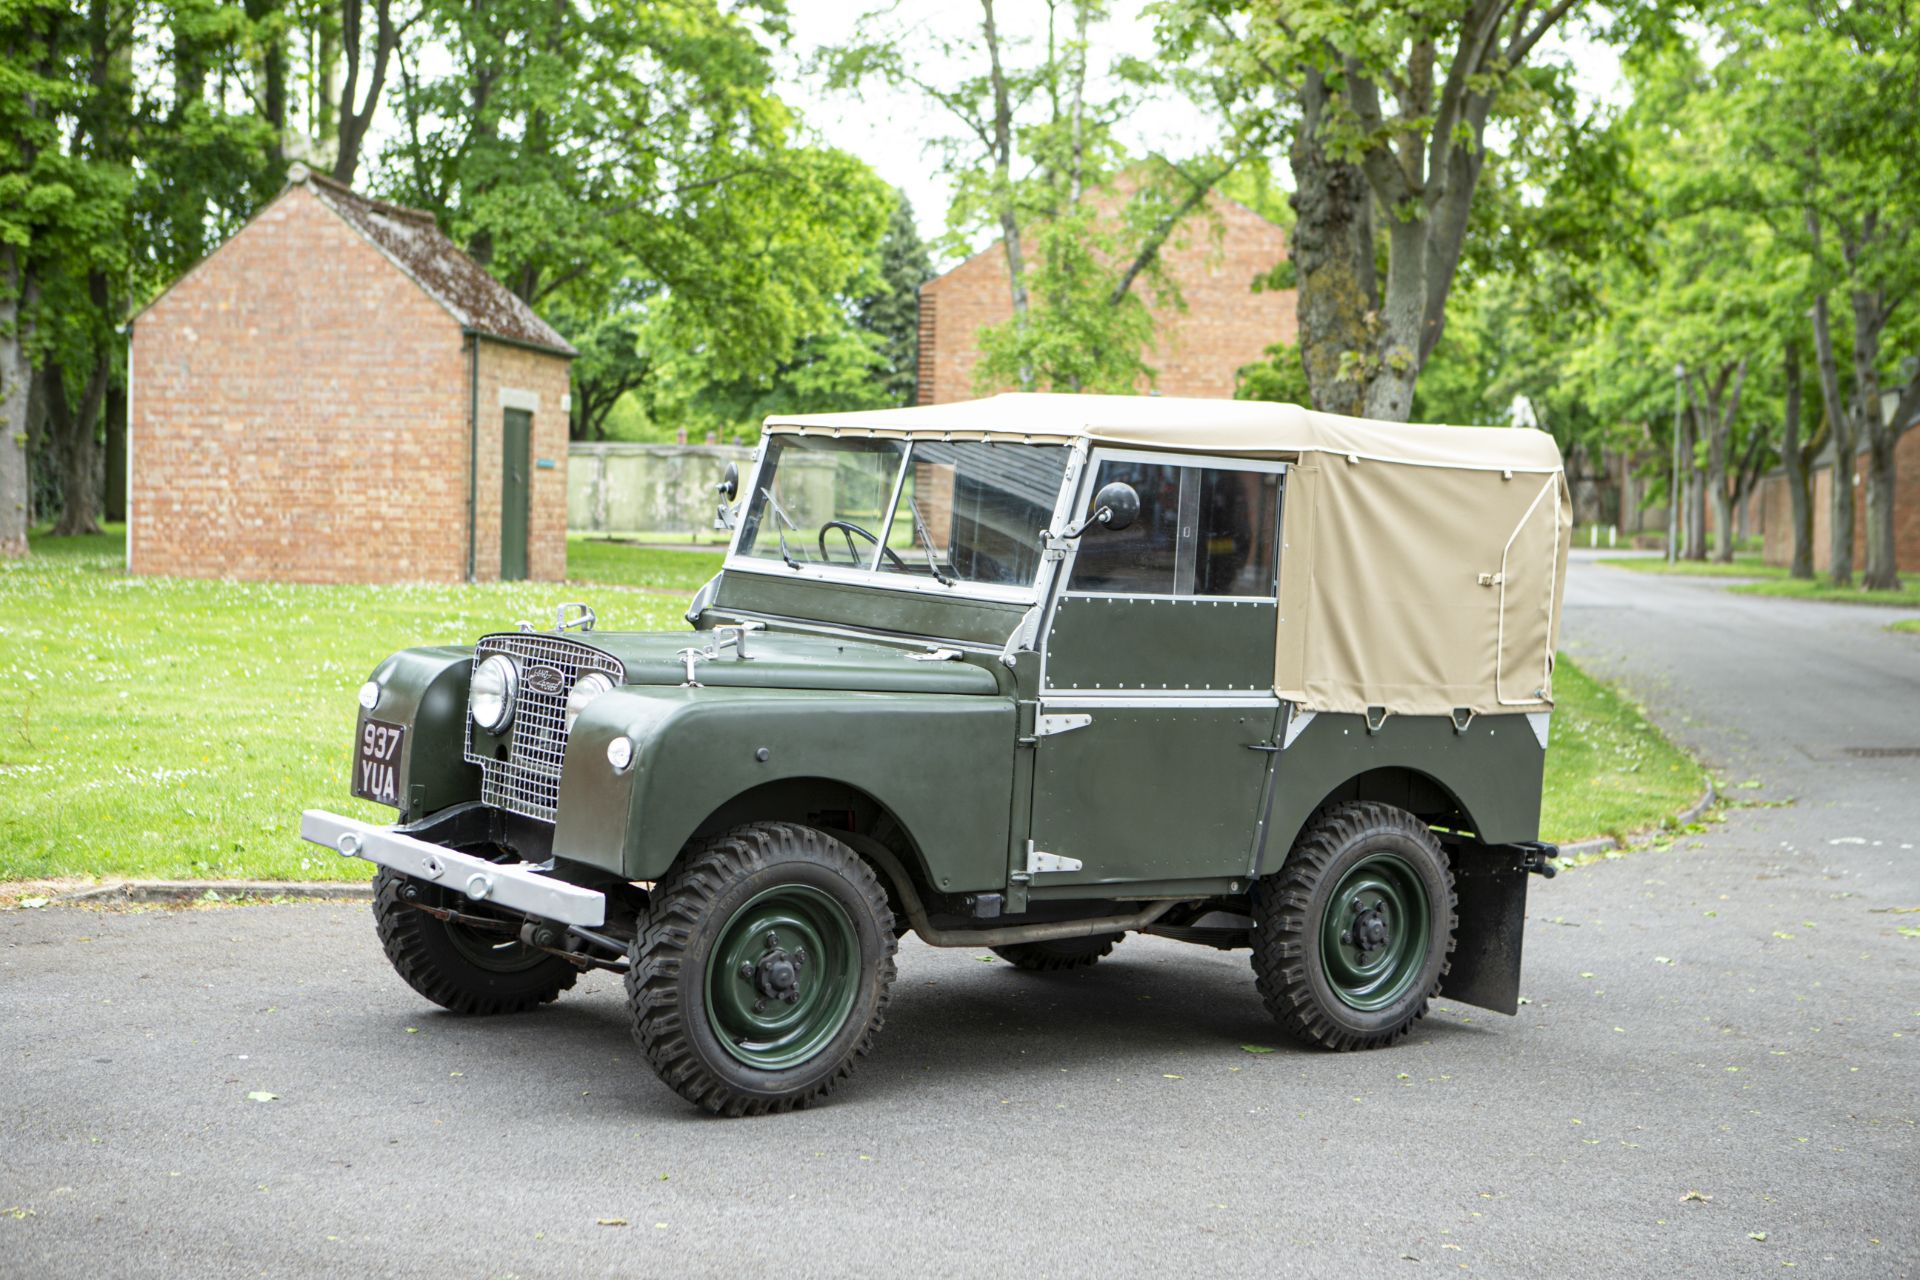 1952 Land Rover Series I Chassis no. 26105302